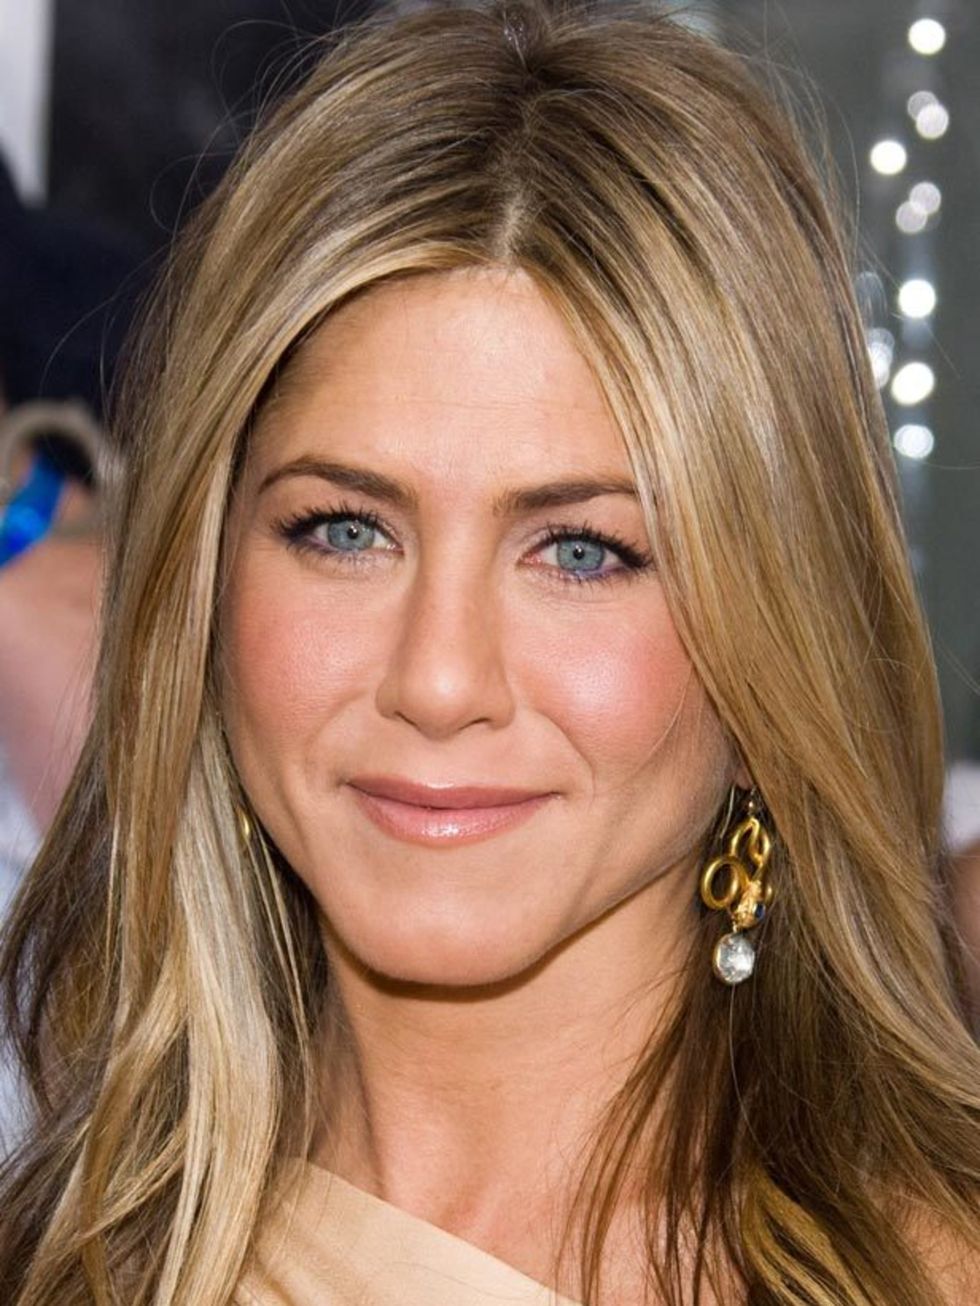 <p><a href="http://www.elleuk.com/beauty/celeb-beauty/celeb-beauty-bags/%28section%29/jennifer-aniston-s-favourite-beauty-buys">Click to see what's in Jennifer's make-up bag...</a></p>